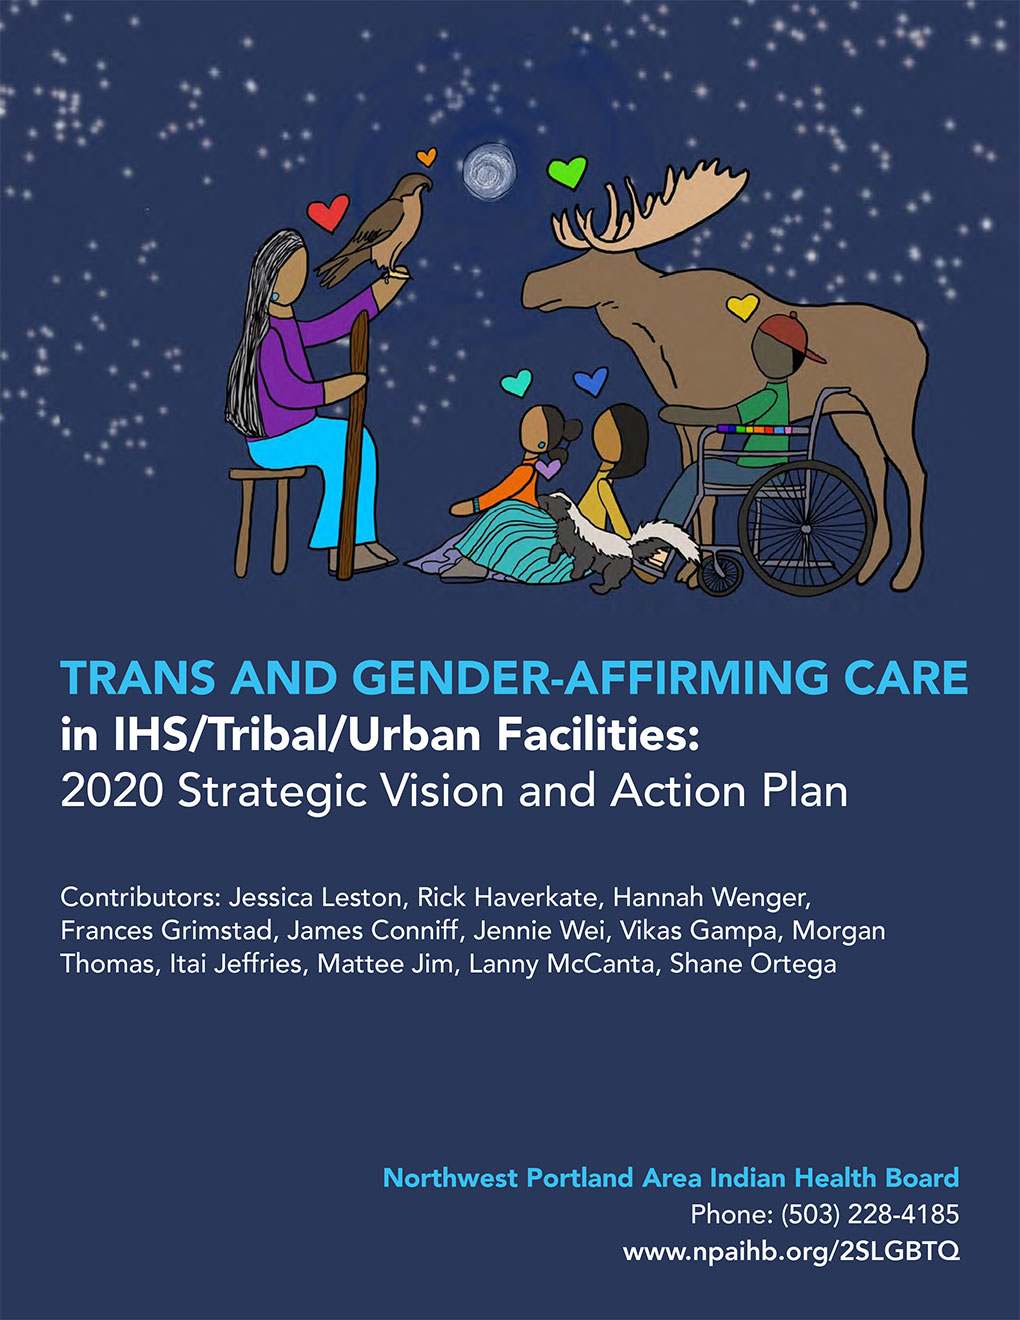 Trans-and-Gender-Affirming-Care-2020-Strategic-Vision-and-Action-Plan-cover